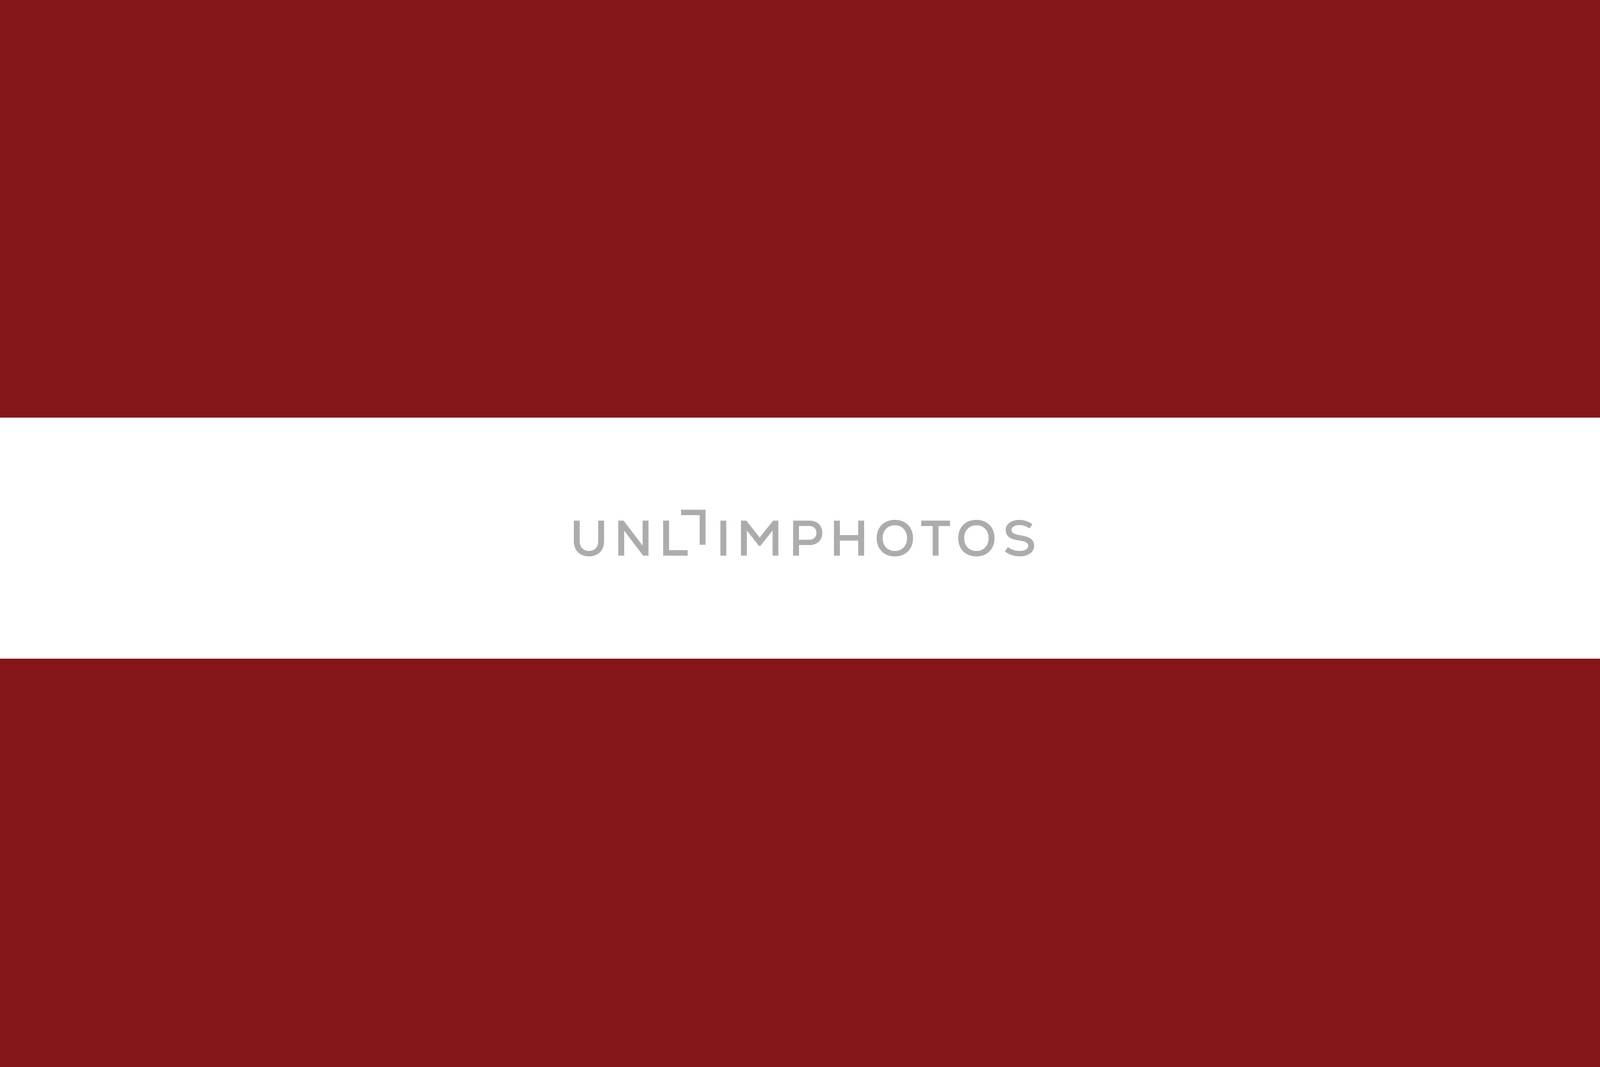 An Illustrated Drawing of the flag of Latvia